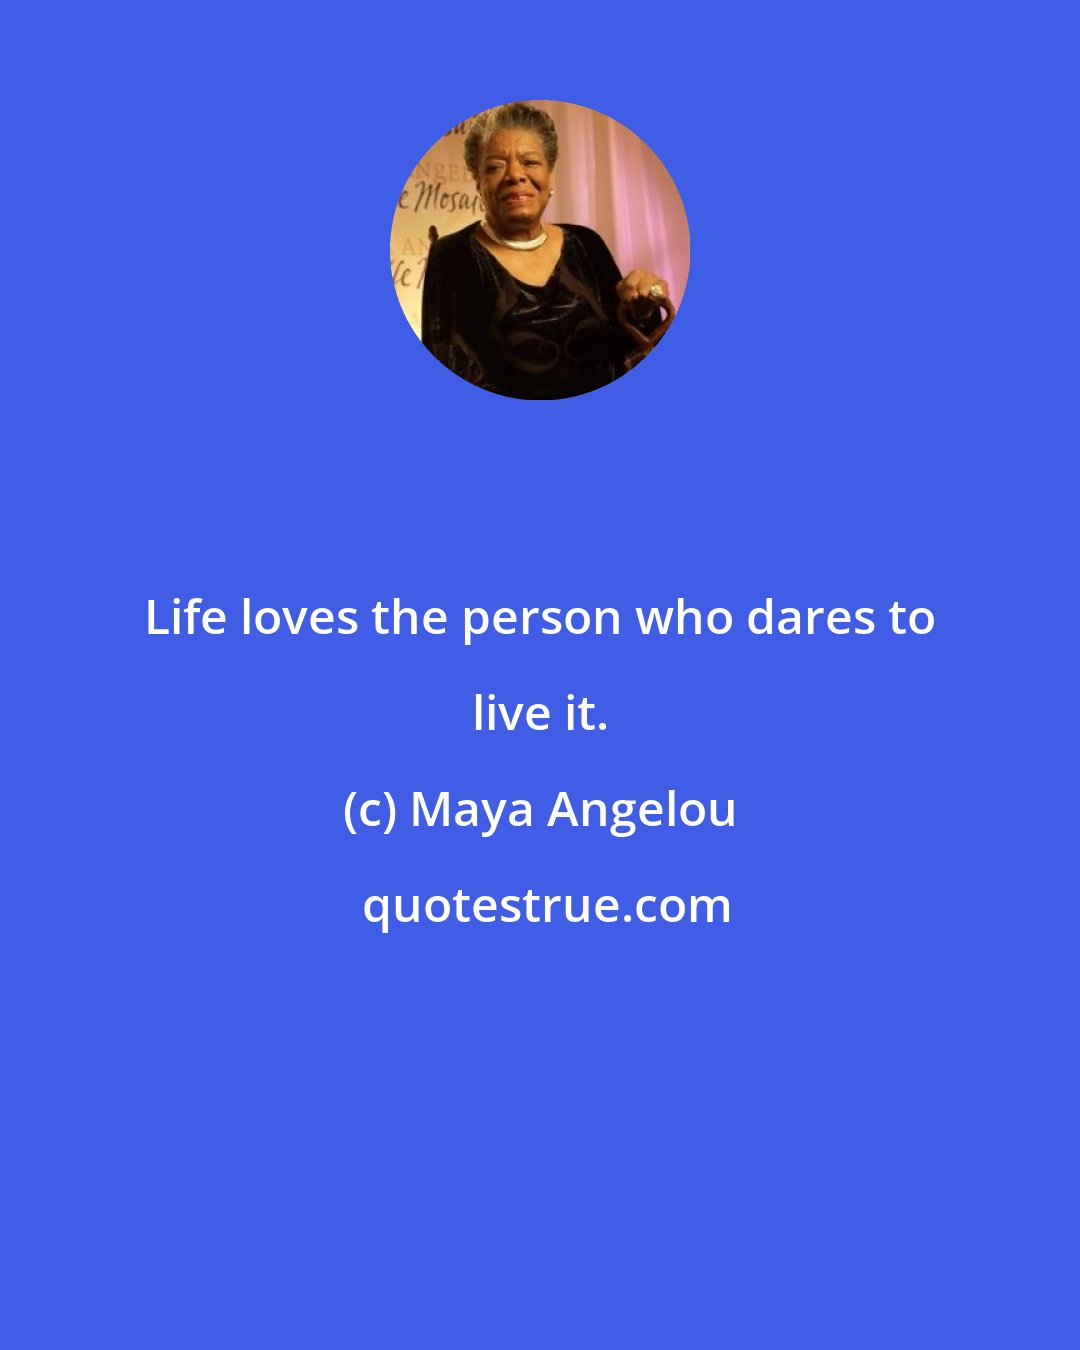 Maya Angelou: Life loves the person who dares to live it.